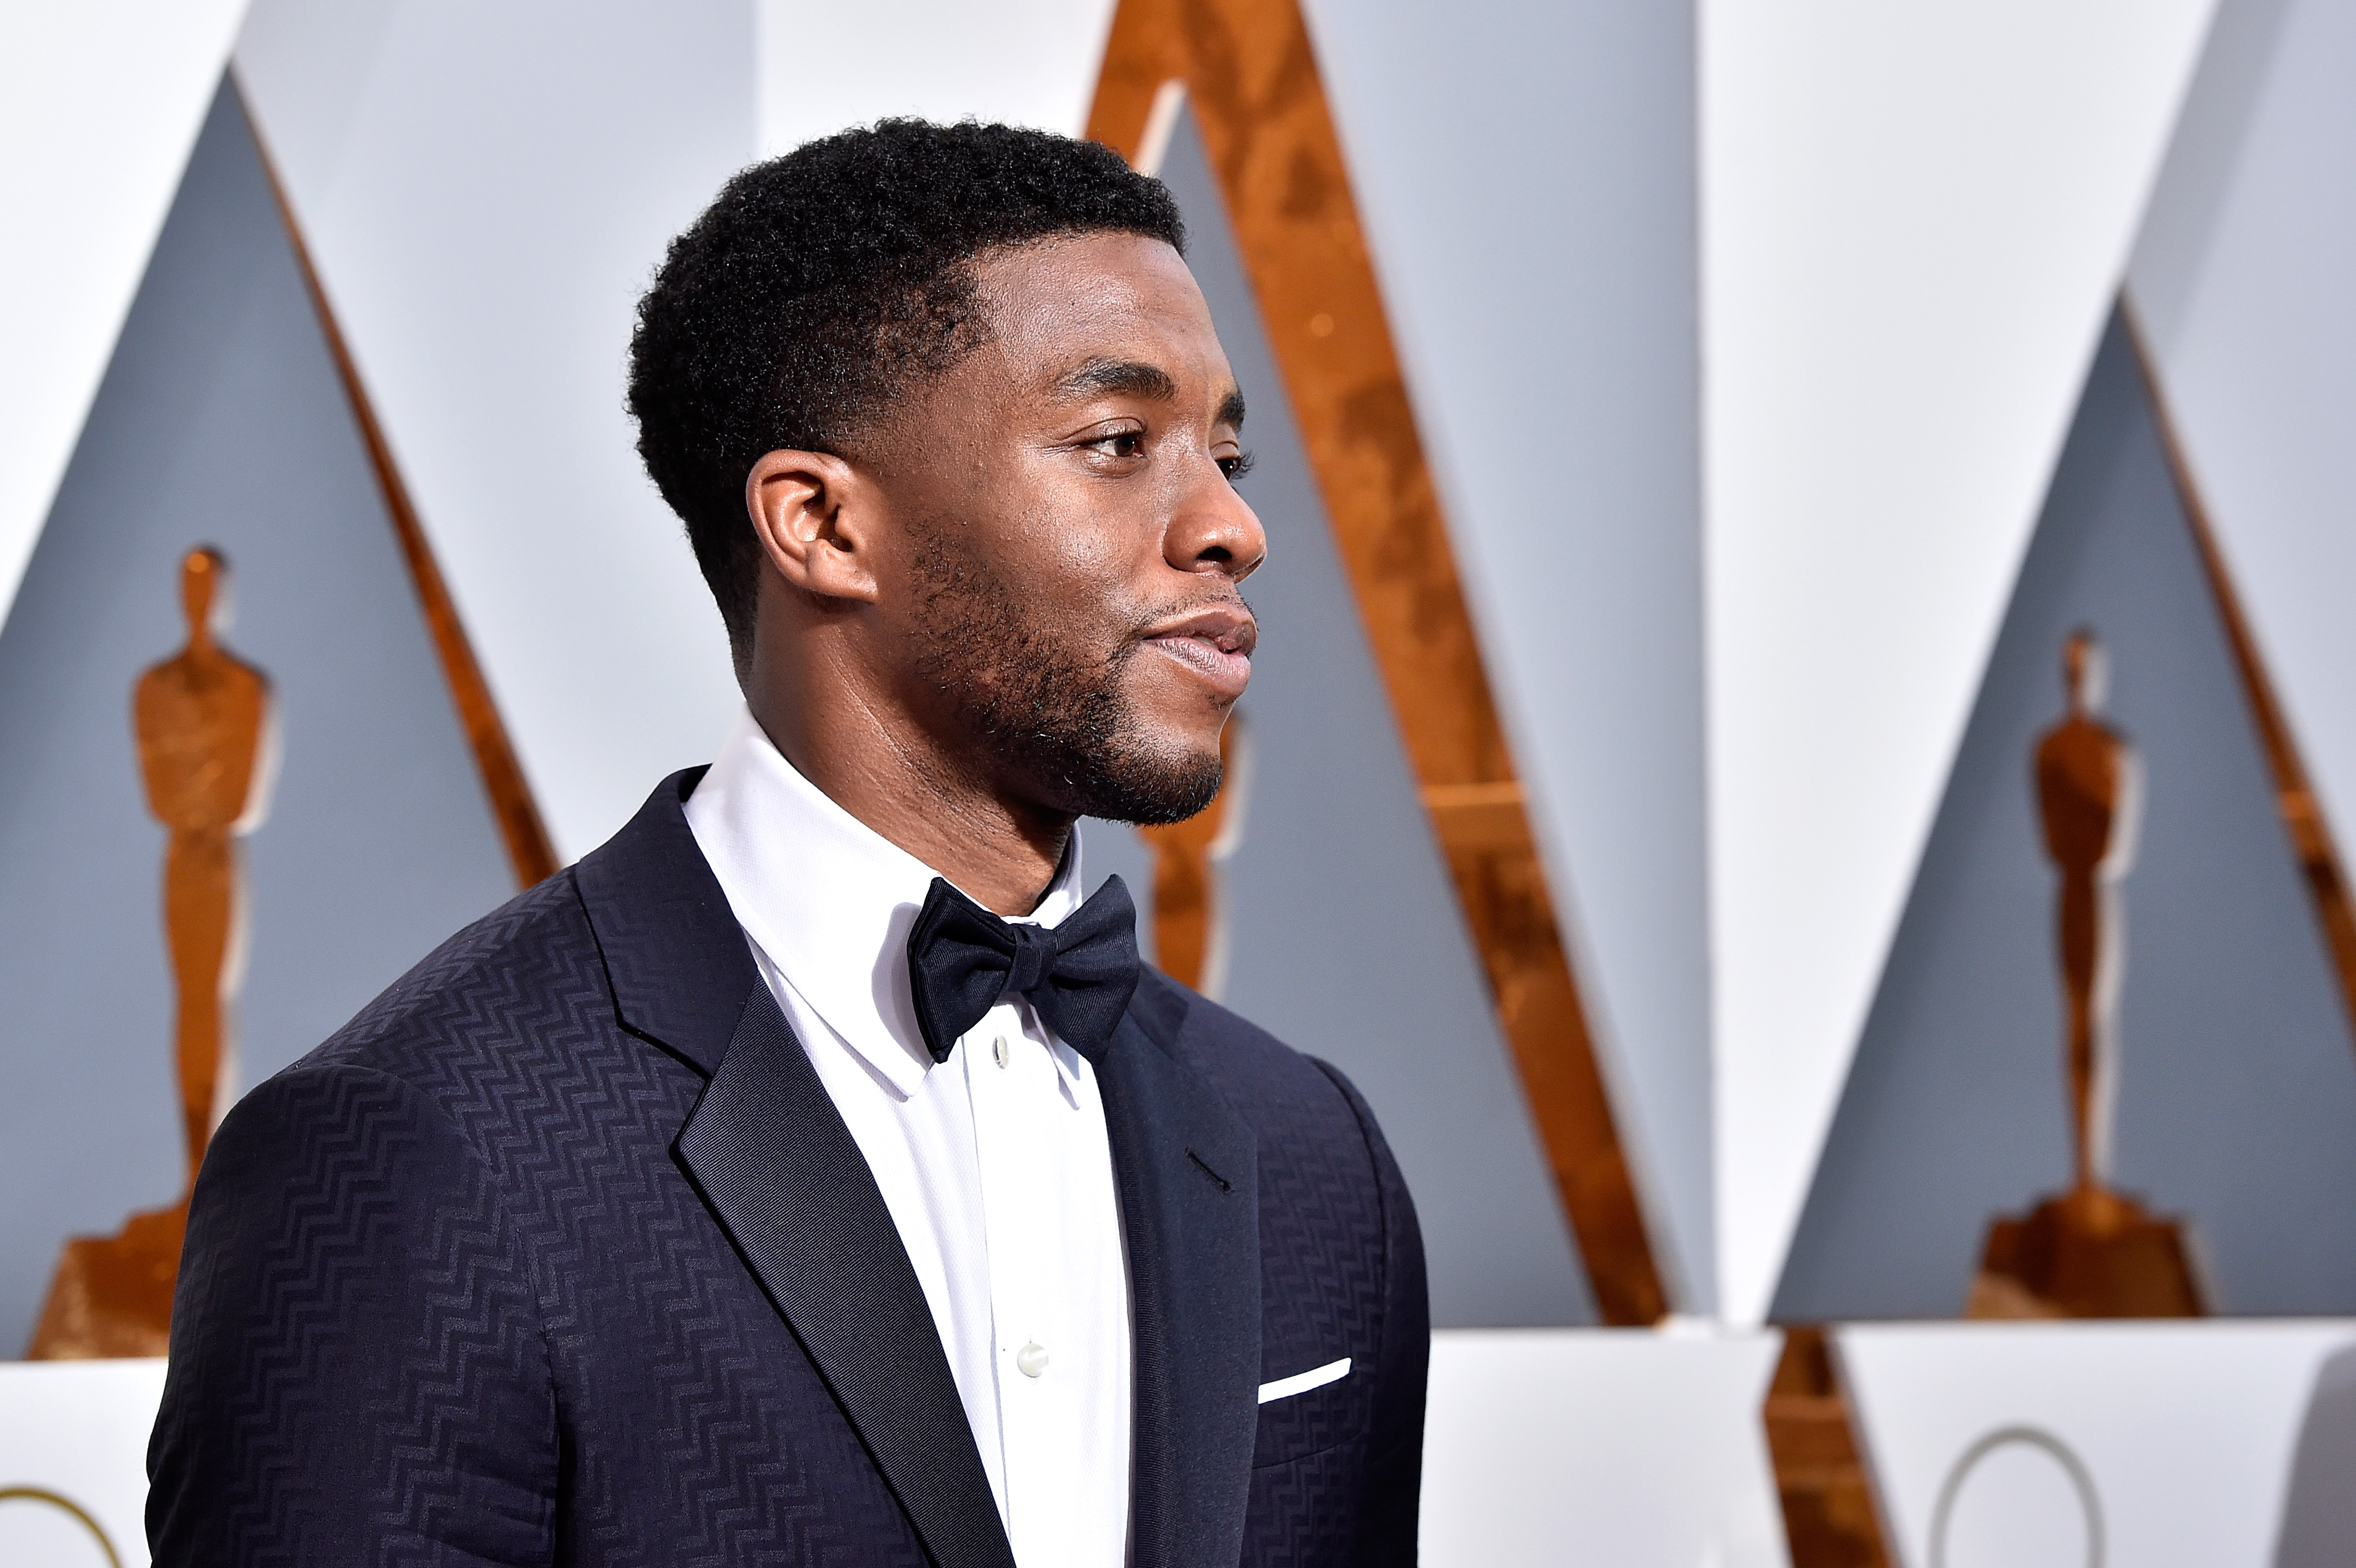 Actor Chadwick Boseman attends the 88th Annual Academy Awards. (Photo by Kevork Djansezian/Getty Images)